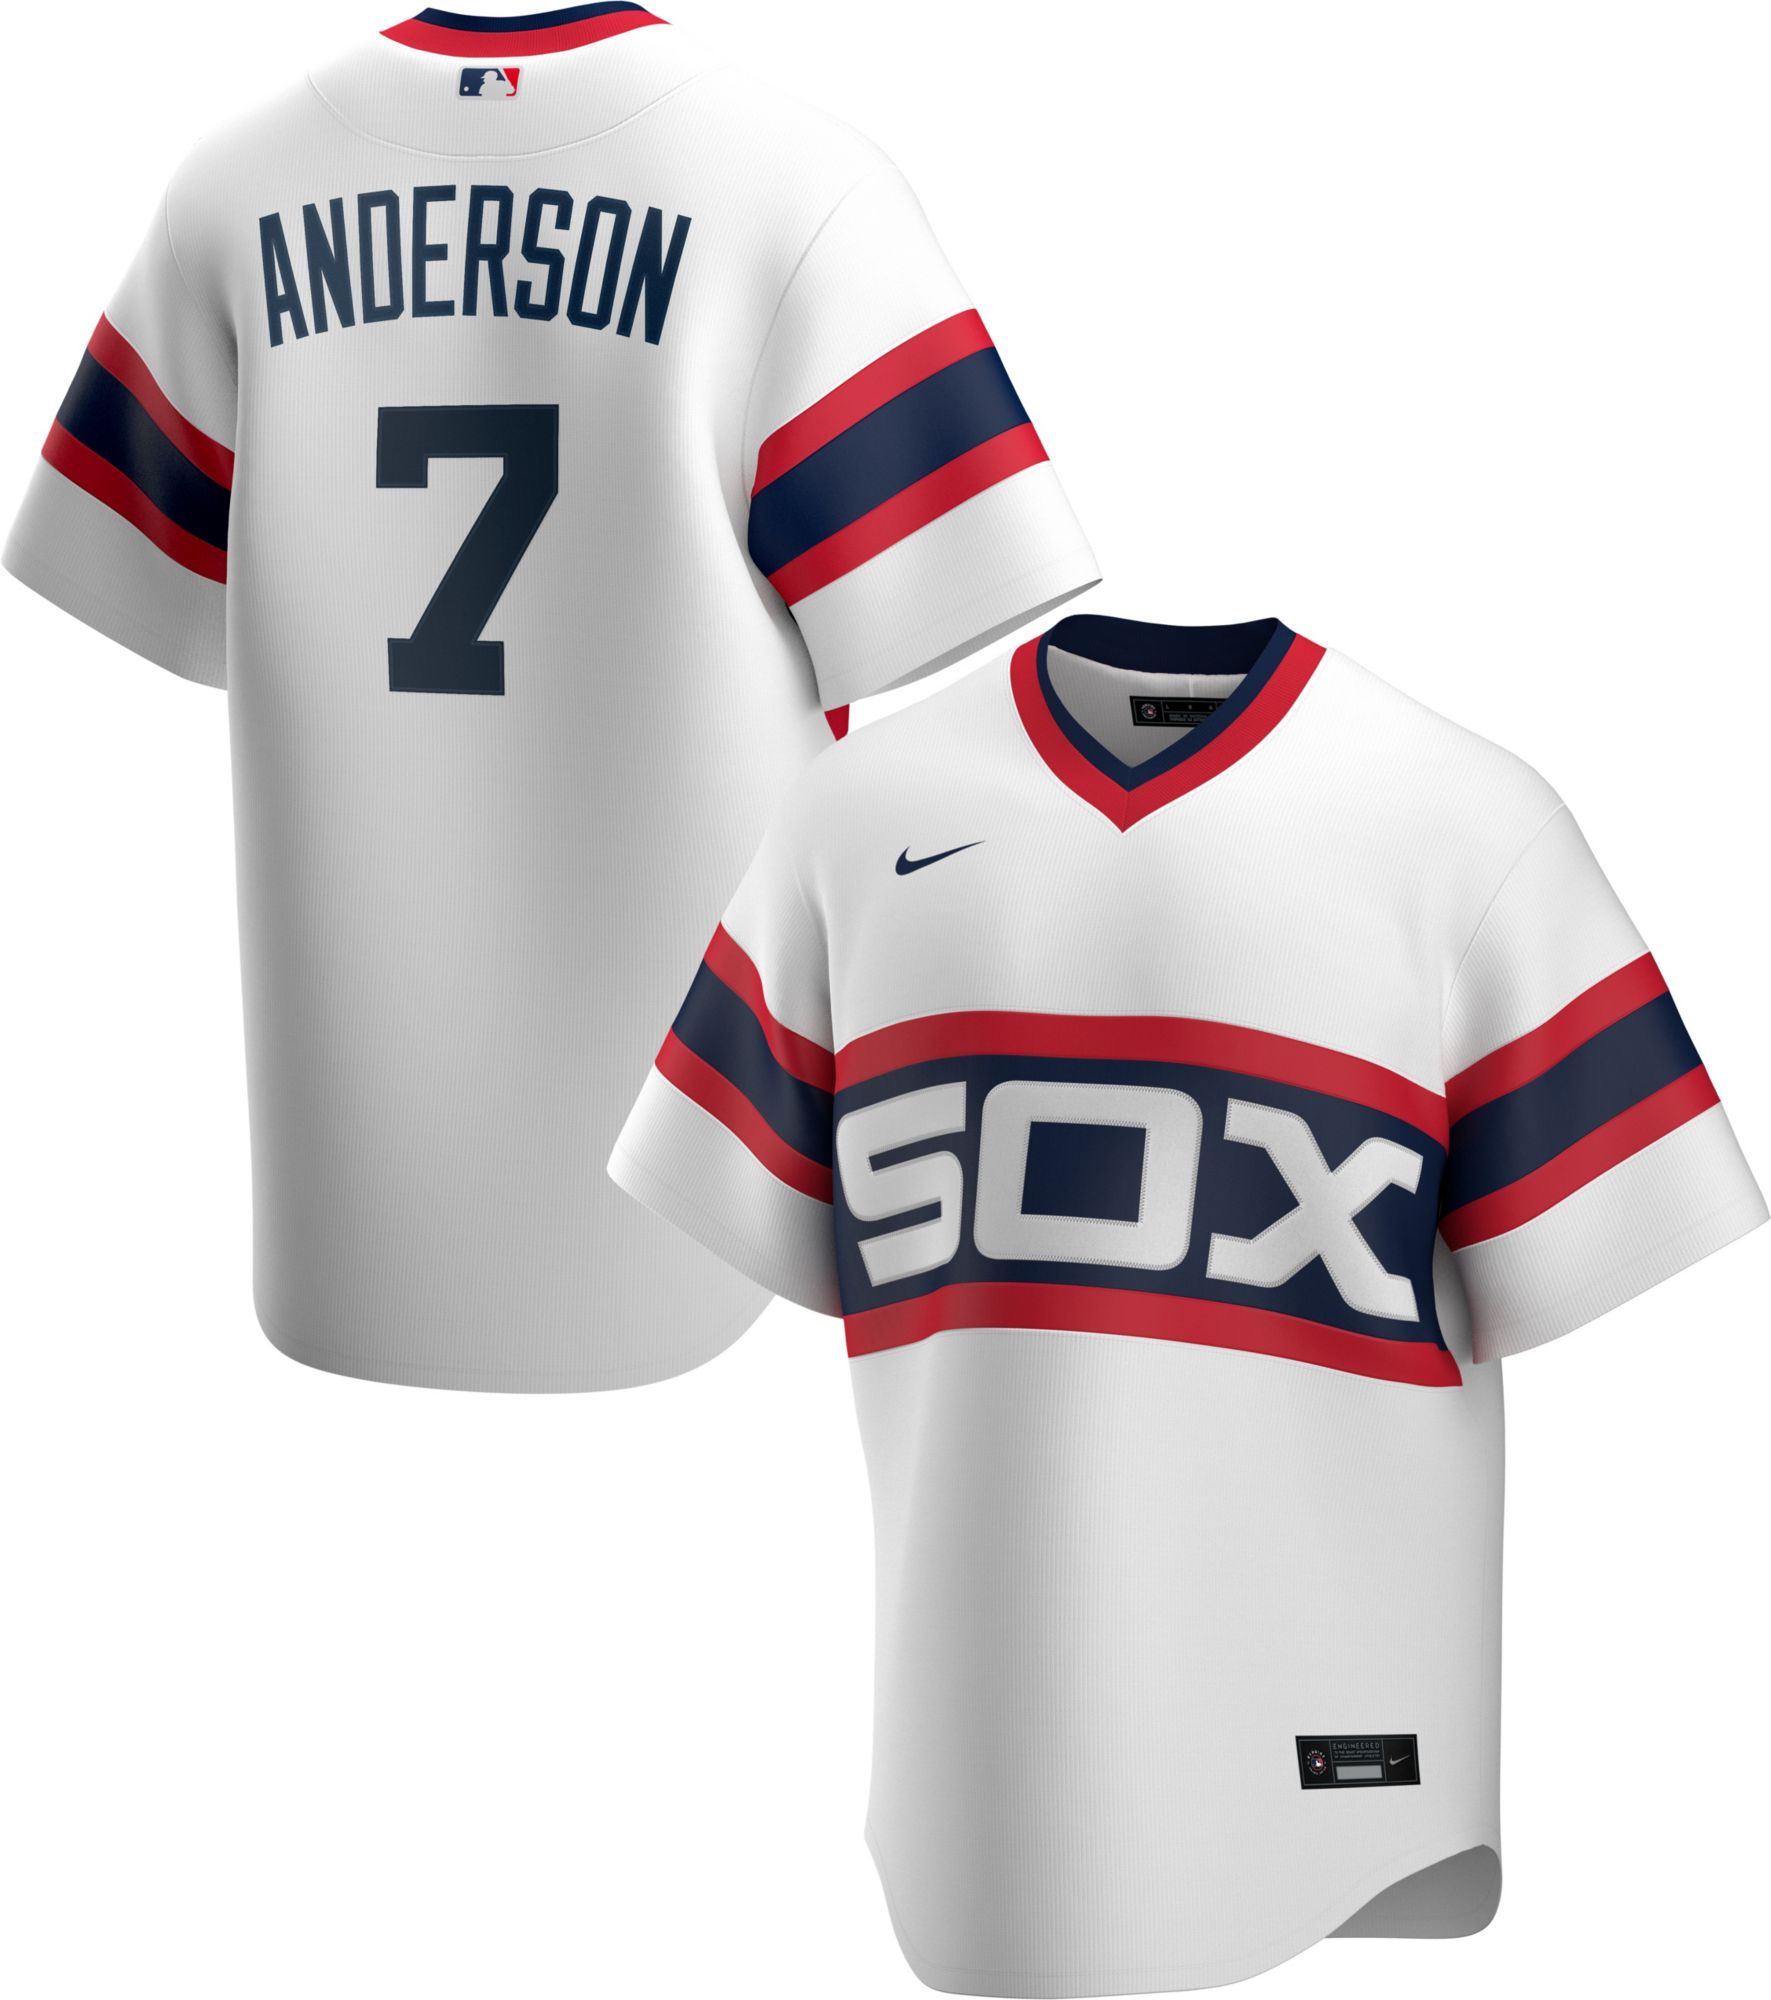 tim anderson jersey white sox